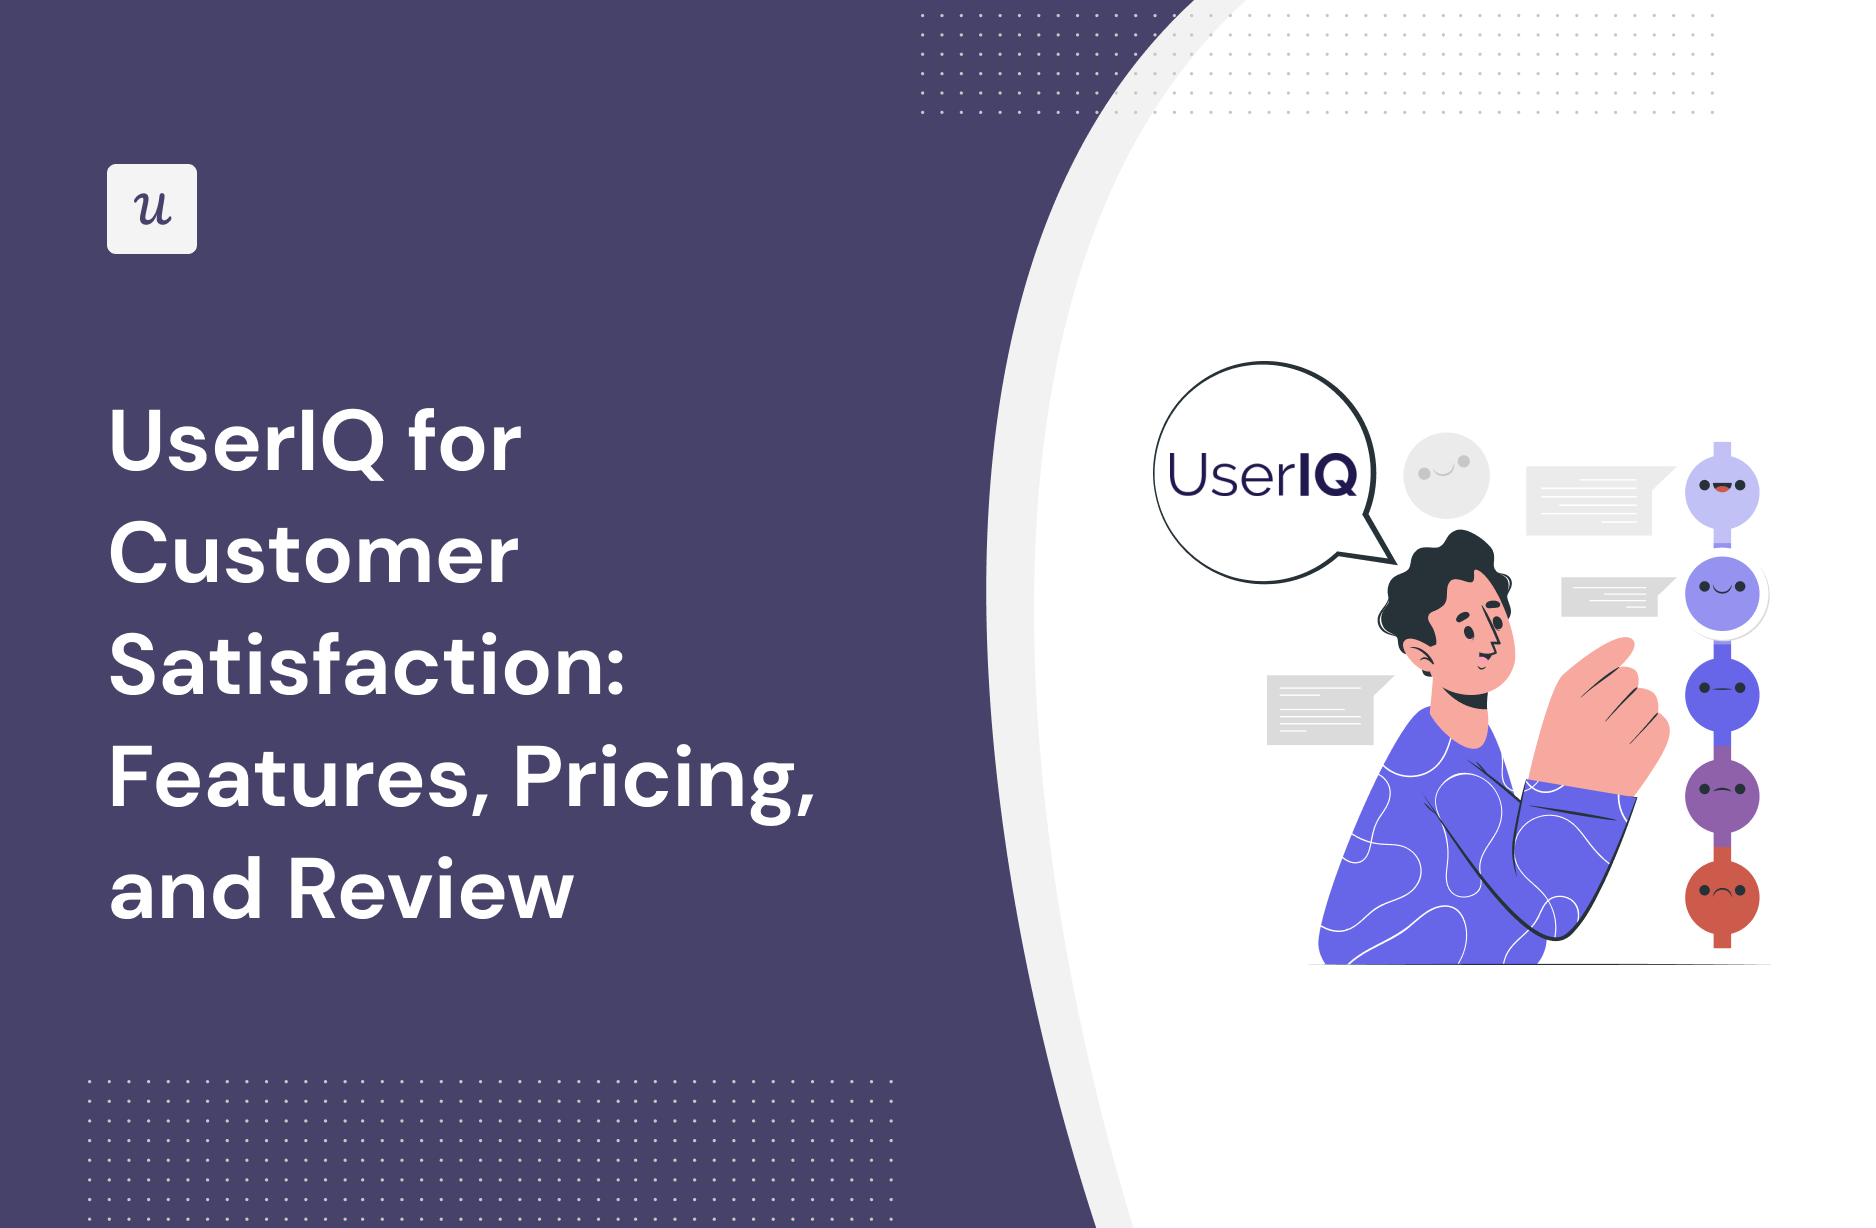 UserIQ for Customer Satisfaction: Features, Pricing, and Review